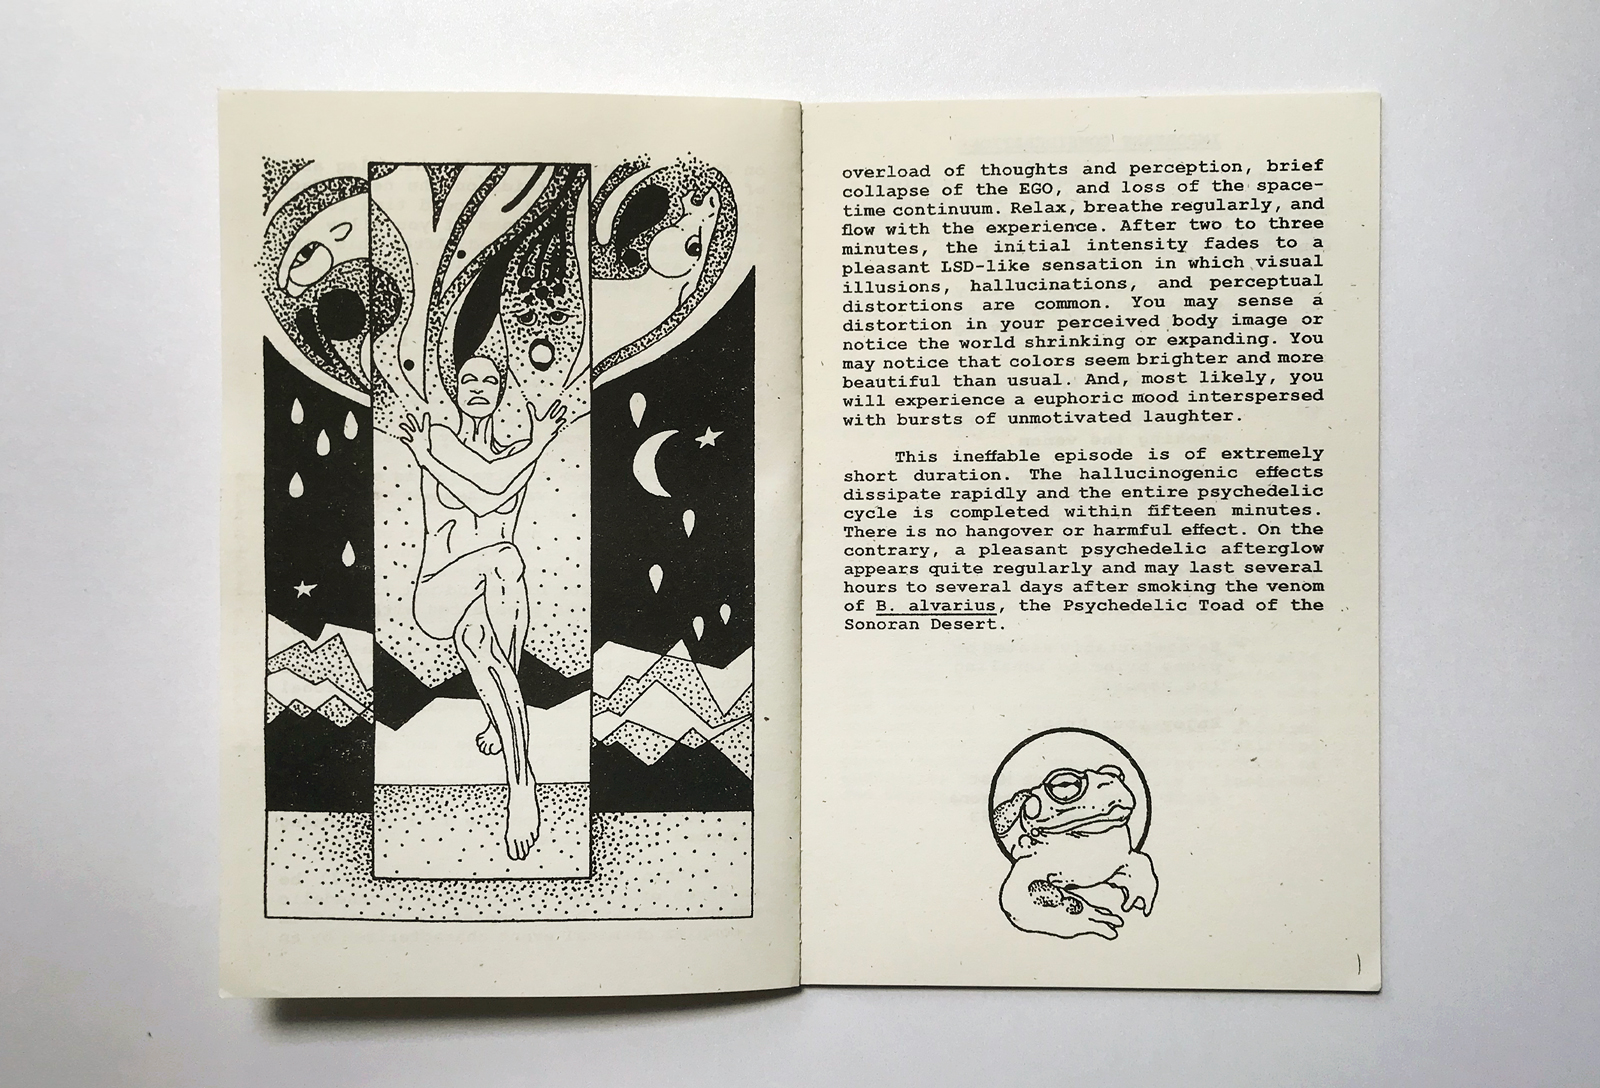 A spread from Bufo Alvarius: The Psychedelic Toad of the Sonoran Desert demonstrates the kind of artwork Gail Patterson was putting into eccentric anonymous zines in the early 1980s.